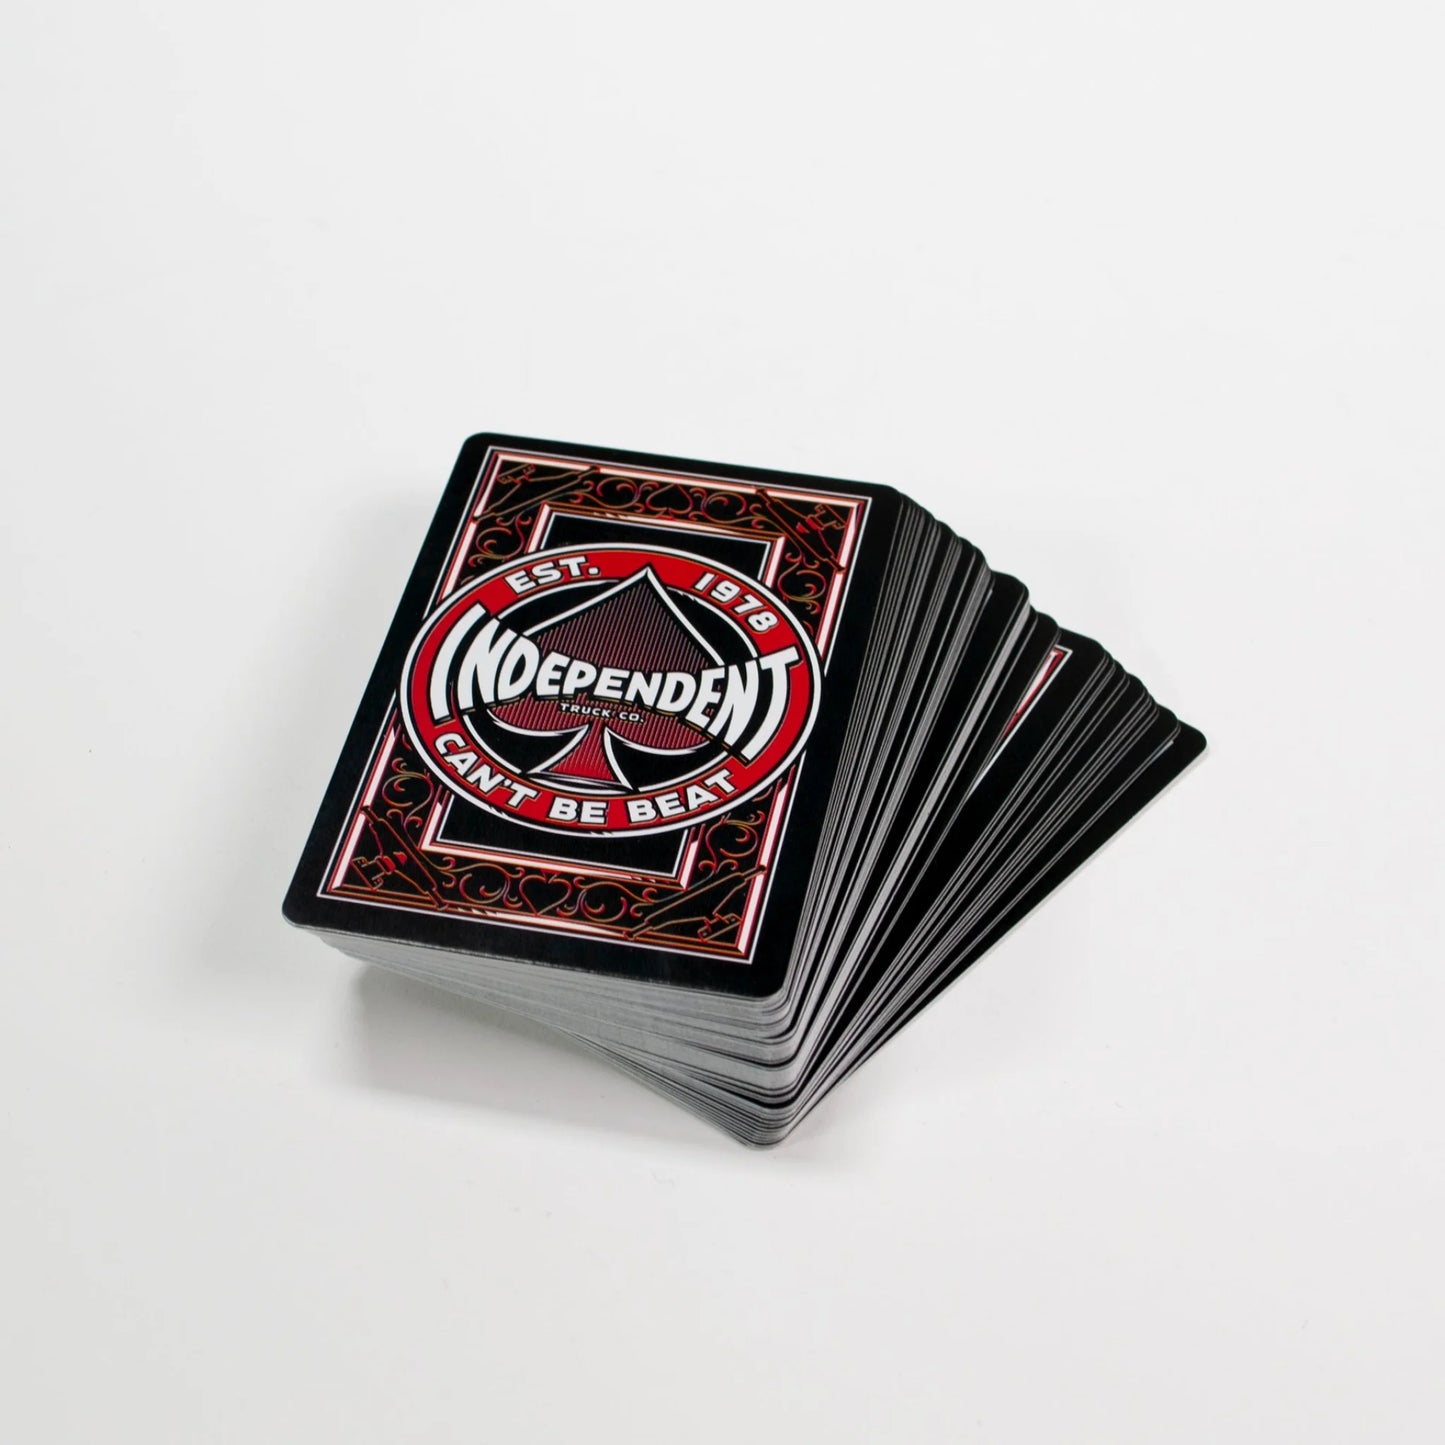 Independent Can't Be Beat 78 Playing Cards - Prime Delux Store